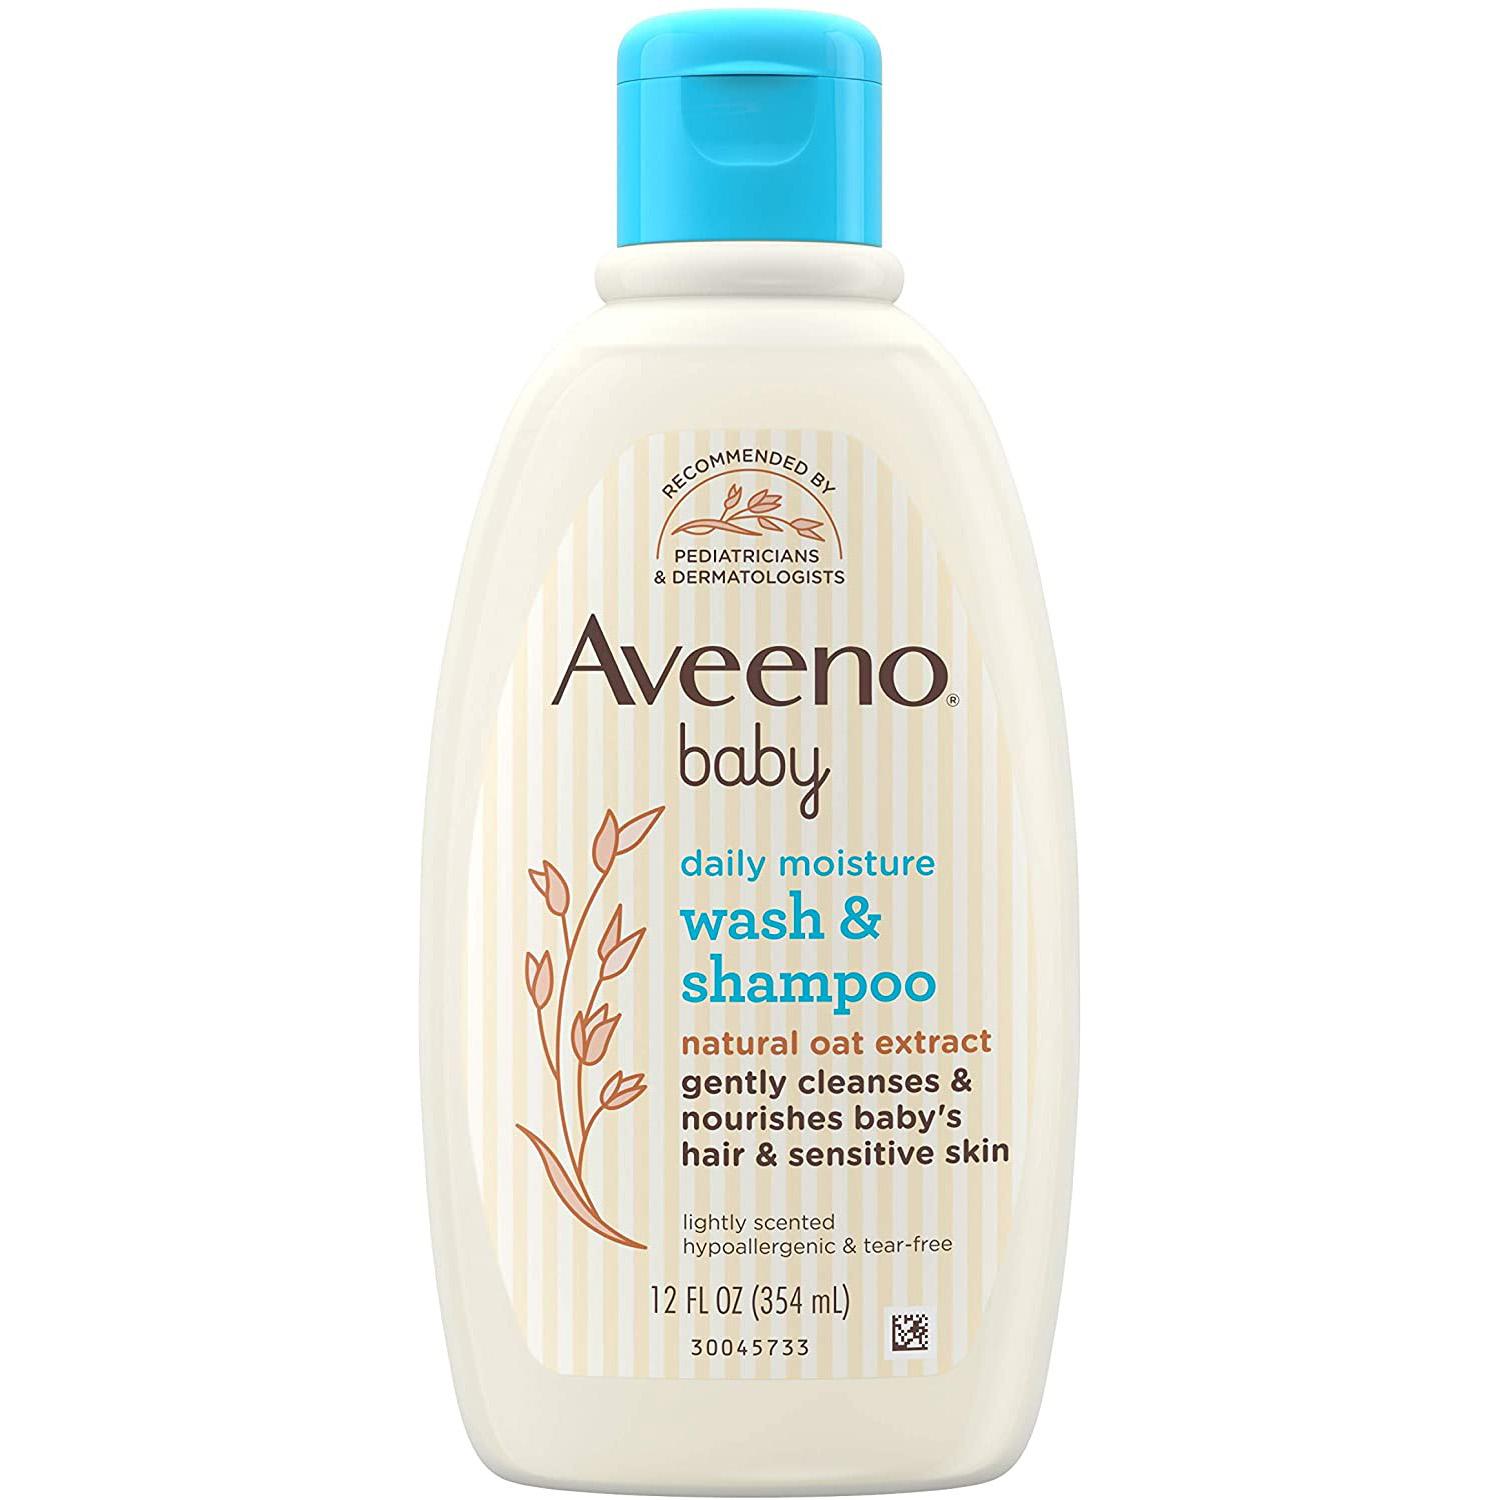 Aveeno Baby Gentle Wash & Shampoo with Natural Oat for $4.57 Shipped